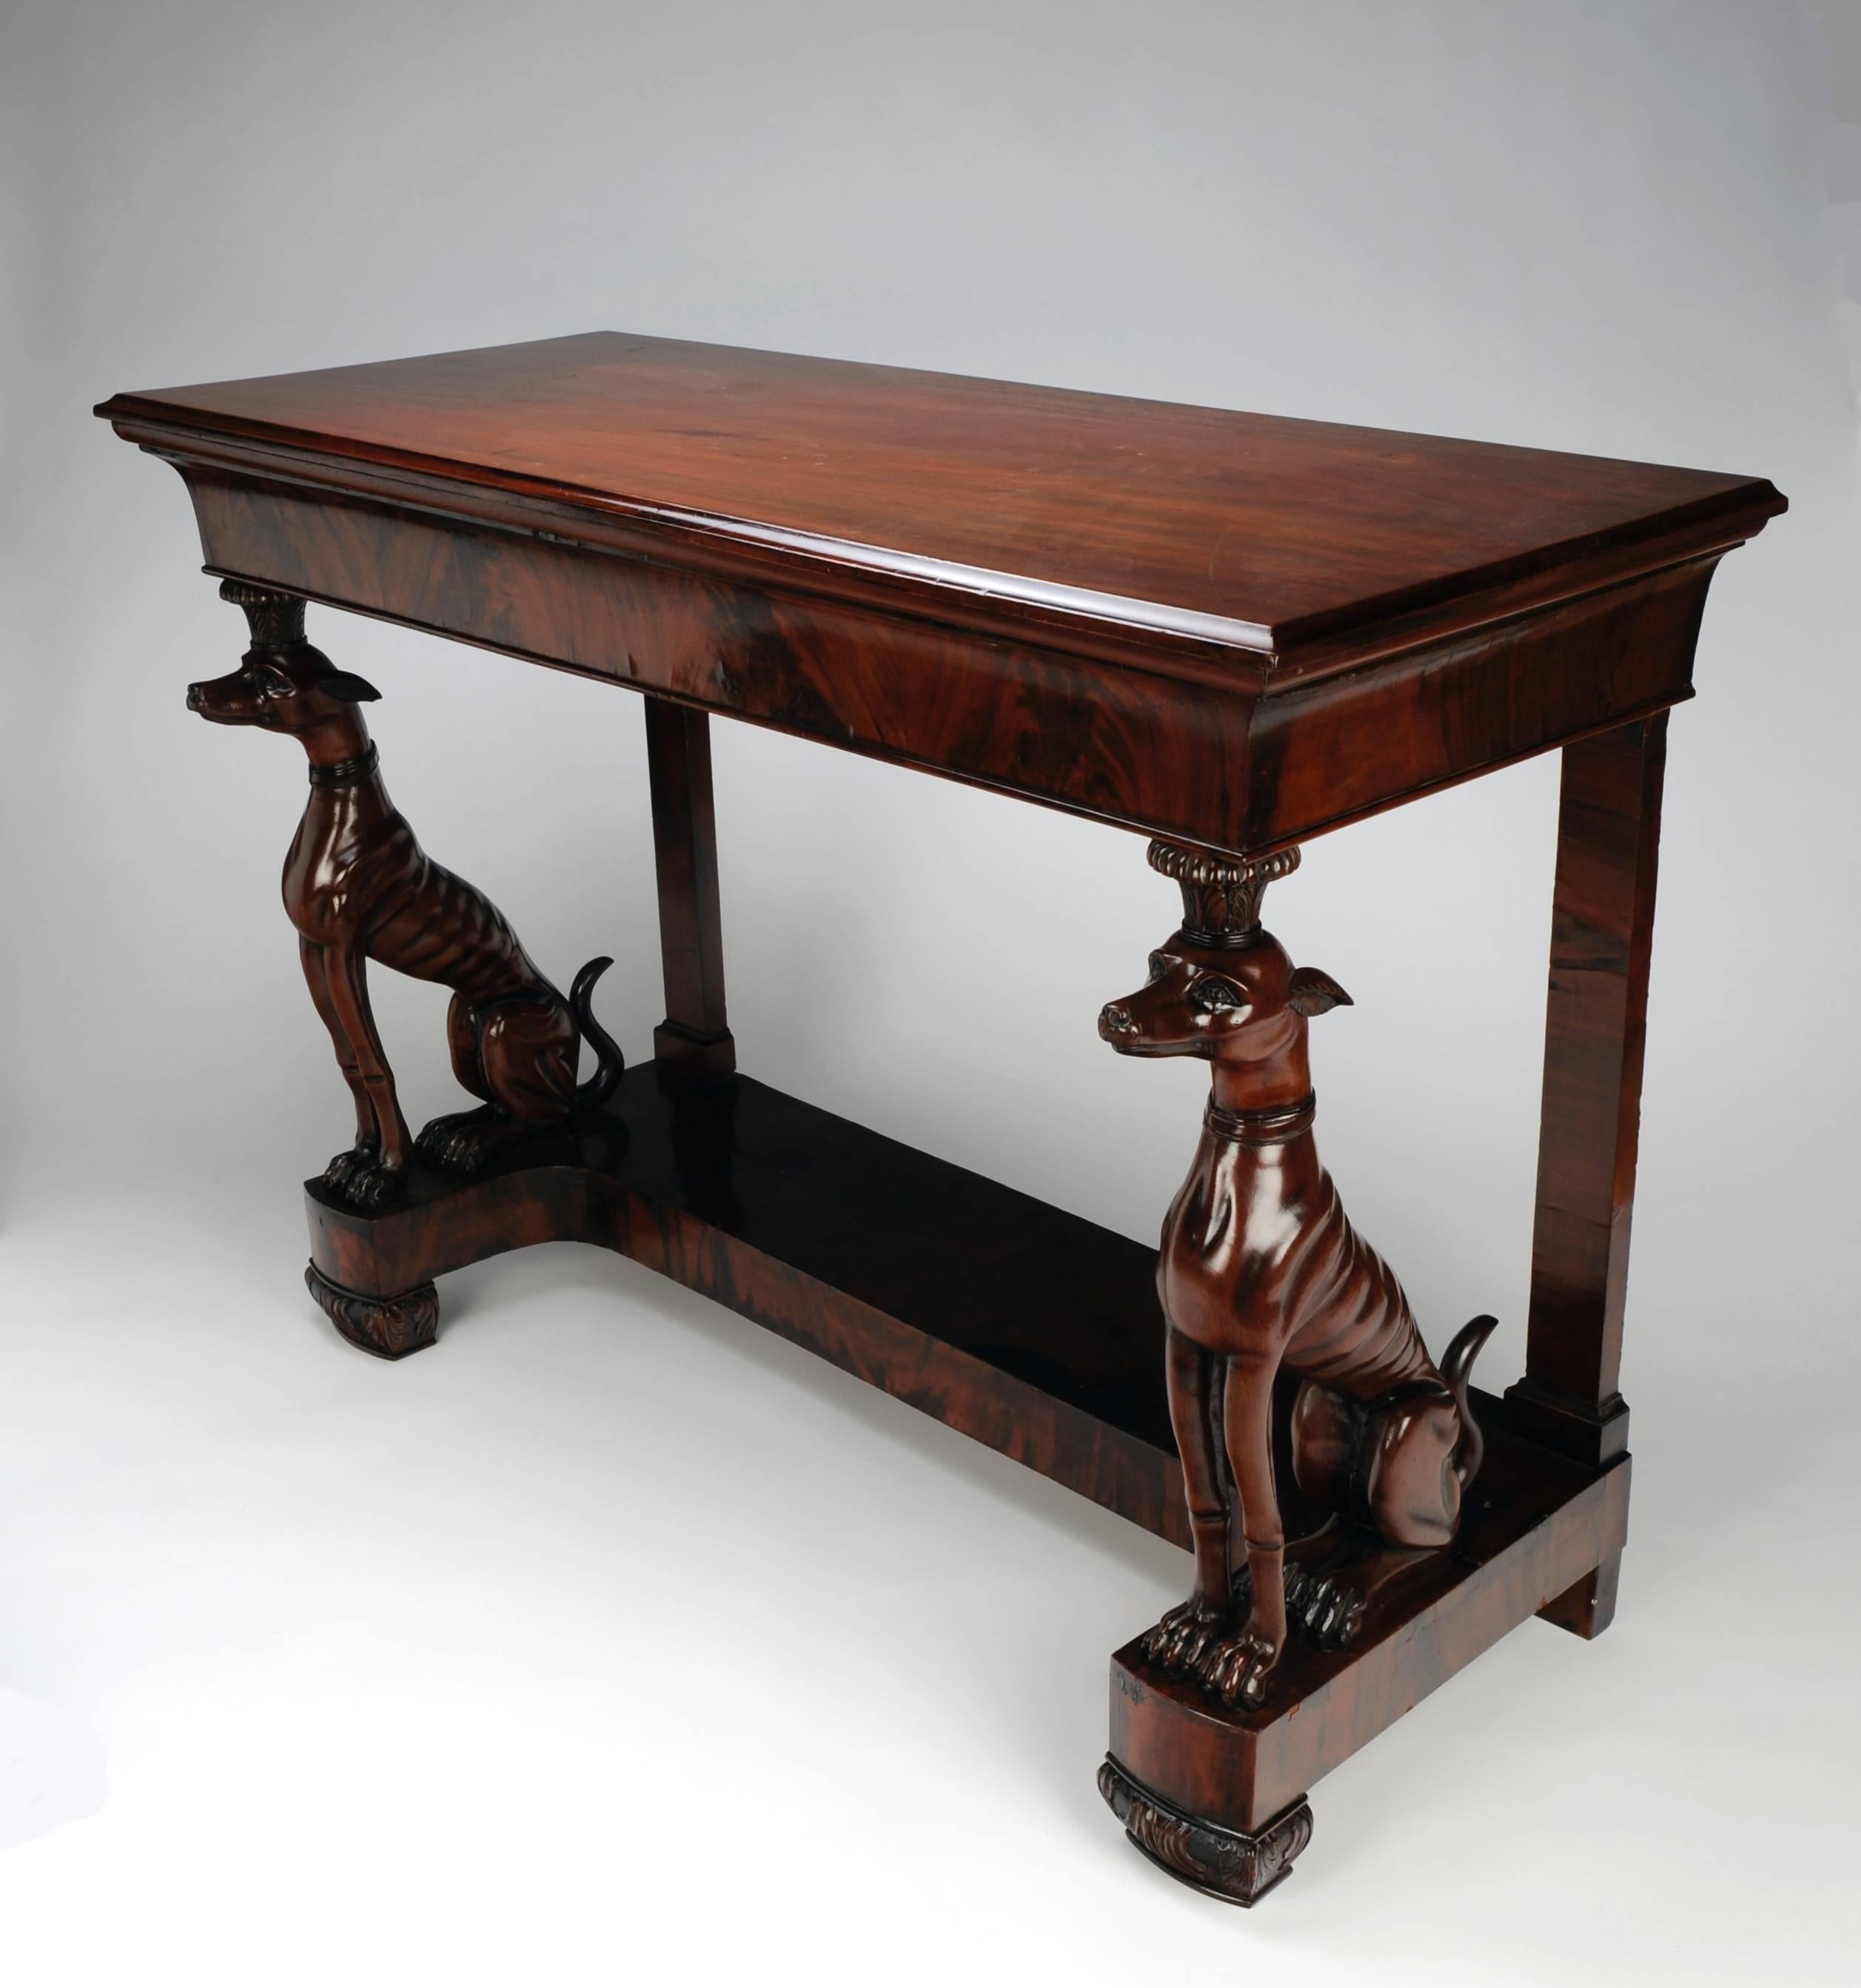 Neapolitan neoclassical console table,
Italy, circa 1820.
Mahogany carved wood.
Measures: 39.25